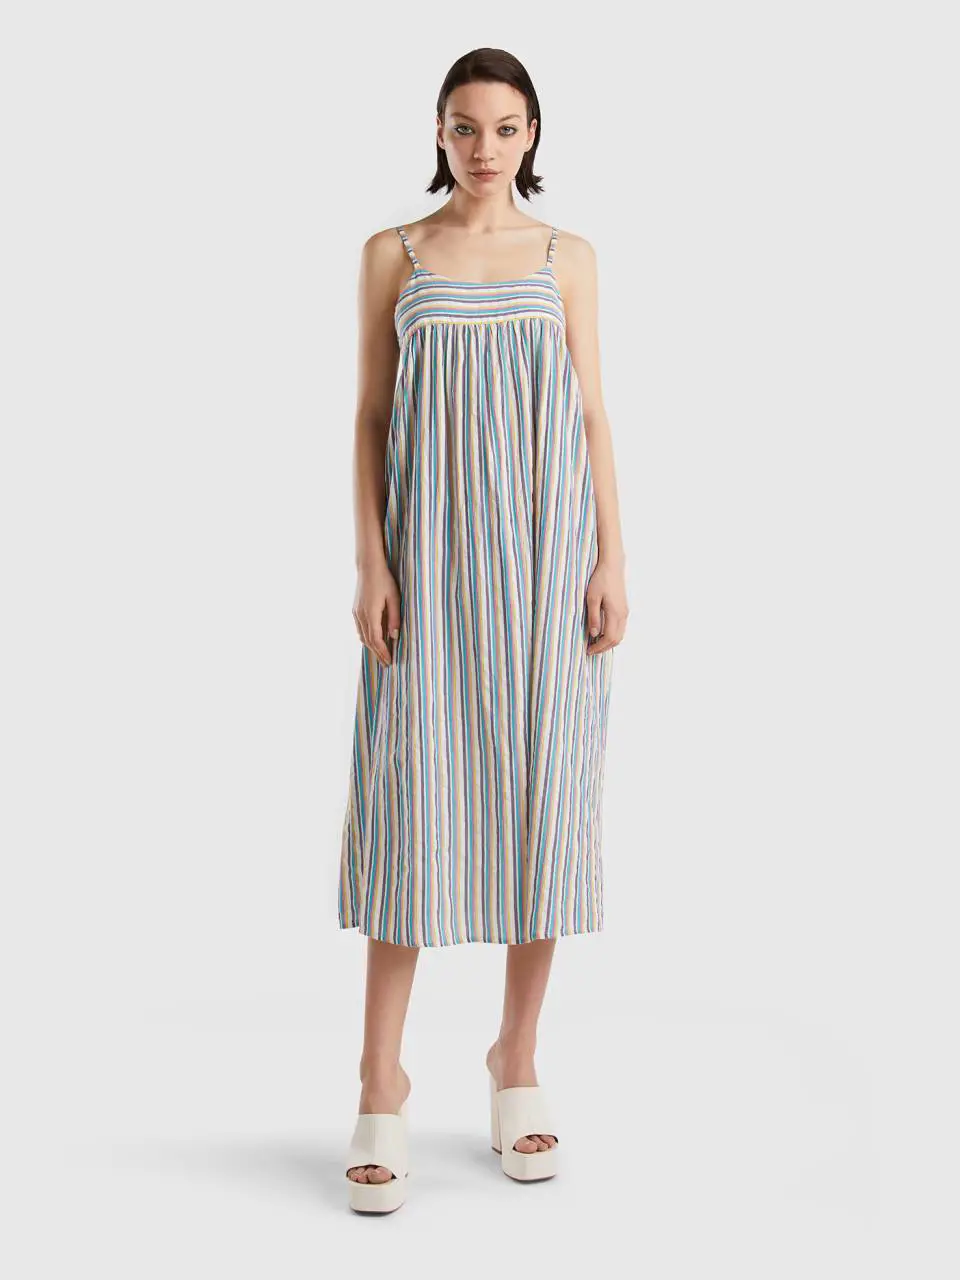 Benetton long dress with stripes. 1